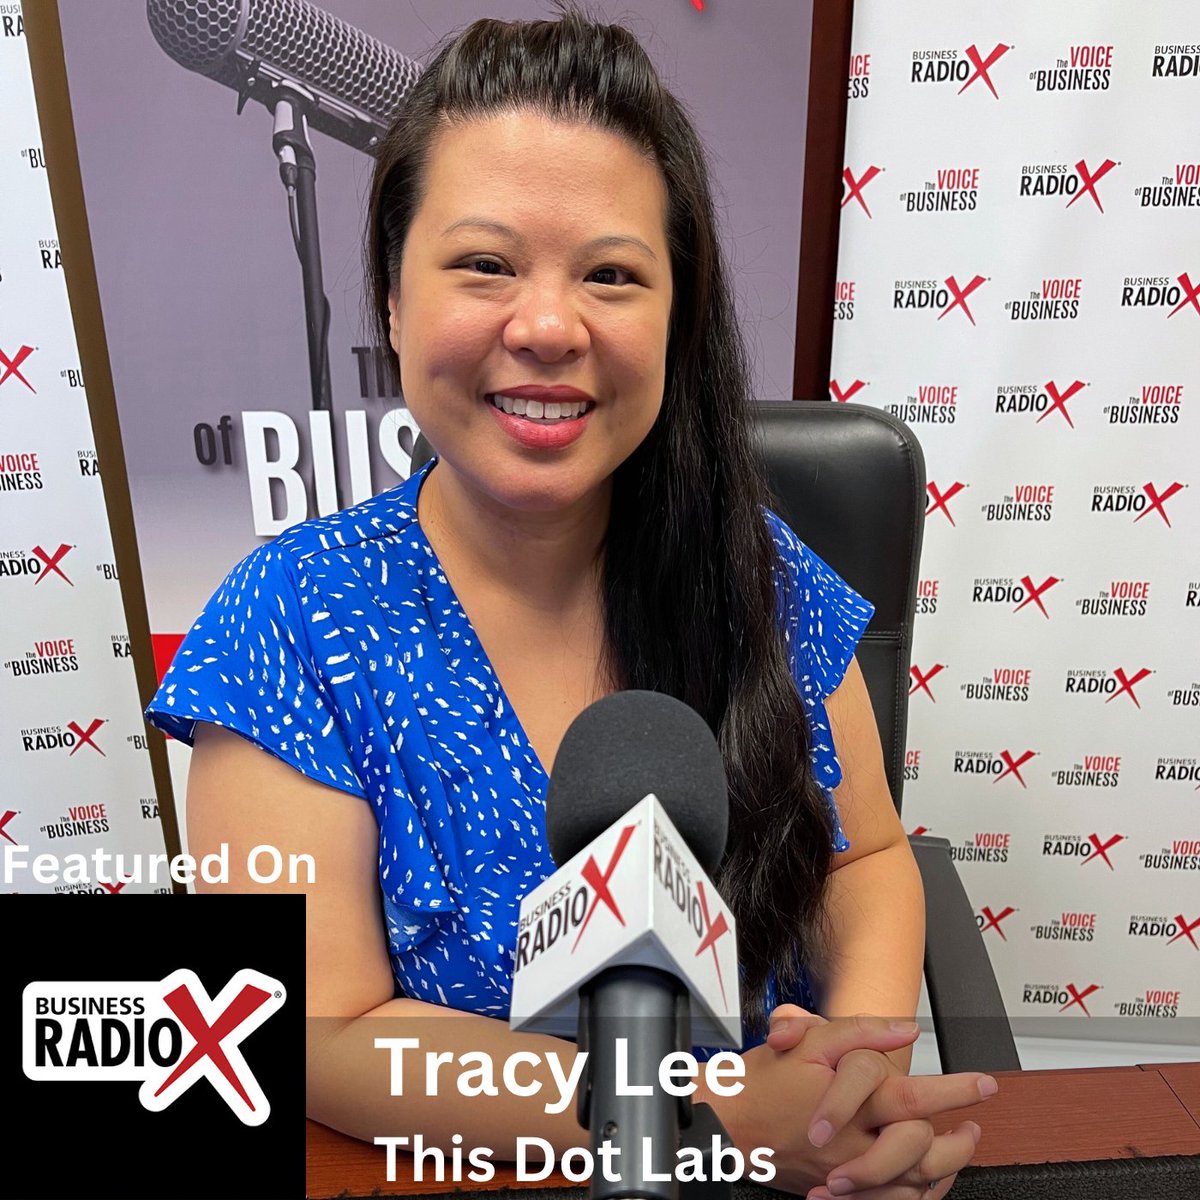 Tracy Lee, CEO of @ThisDotLabs reflected with host @_John_Ray about her entrepreneurial journey from Silicon Valley to co-founding This Dot Labs. Listen here: lnkd.in/gDqVVbpd

Thank you @renasant and OFFICE ANGELS®

#softwaredevelopment #entrepreneurship #voiceofbusiness